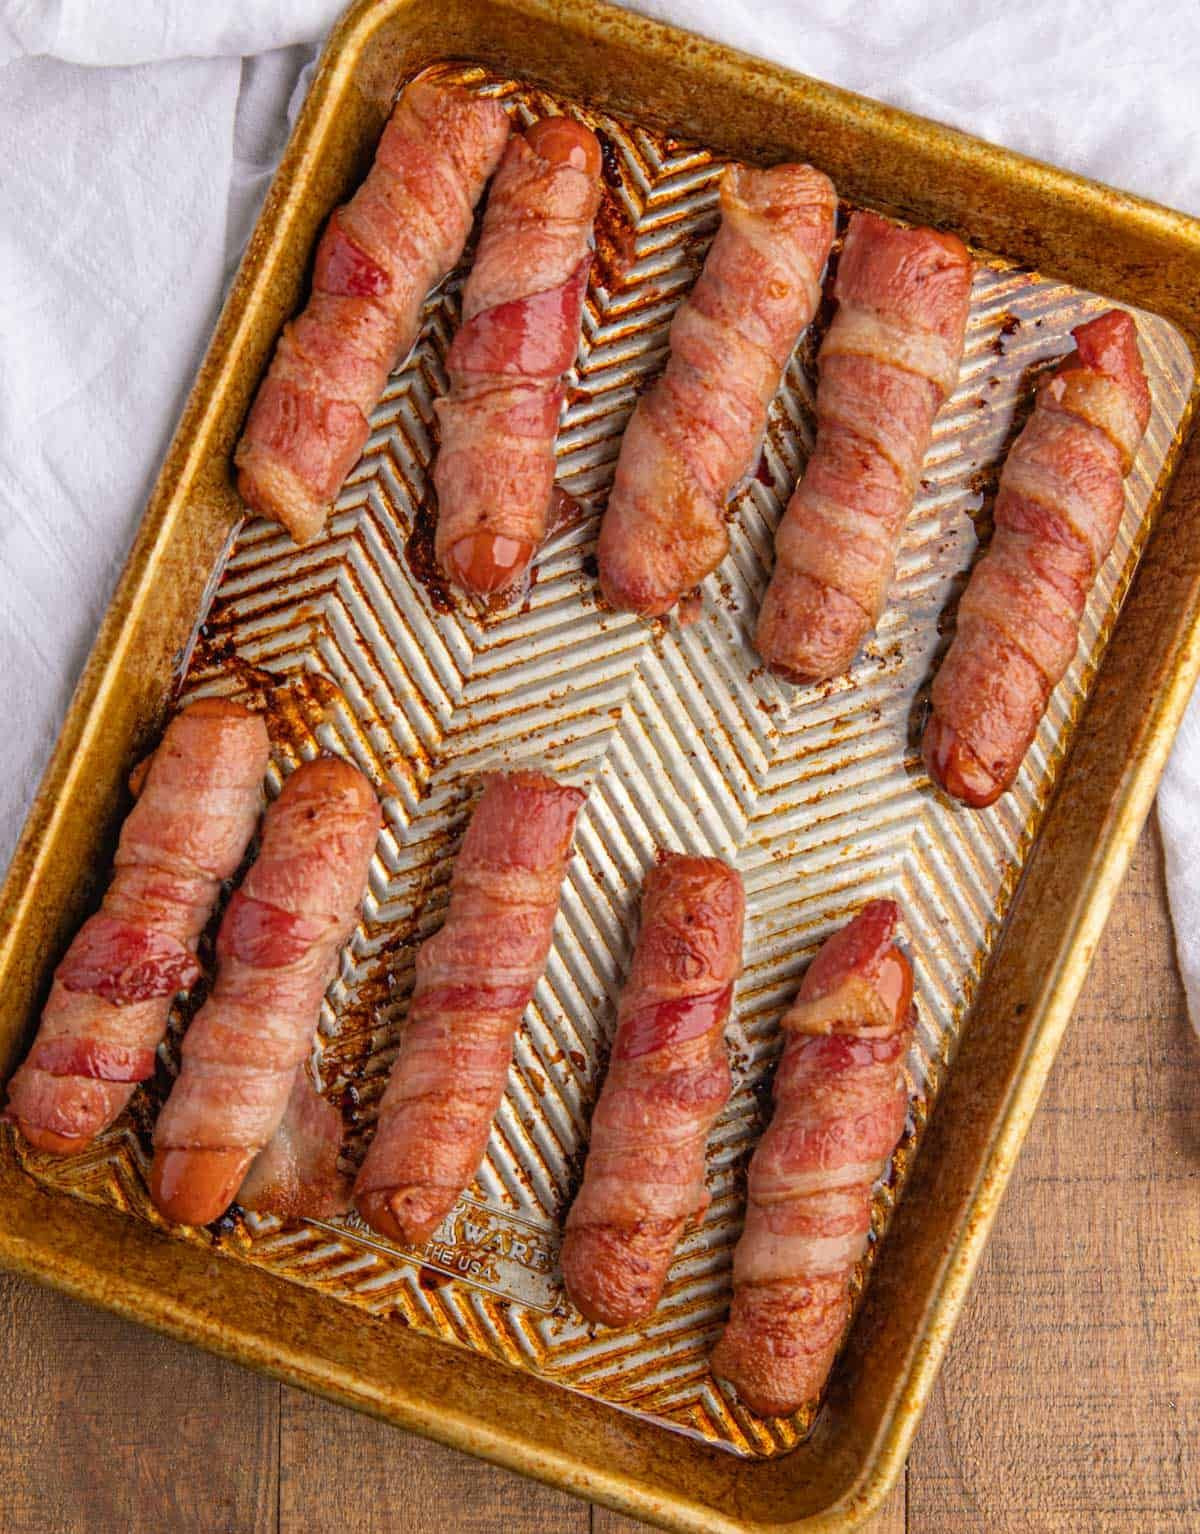 Bacon Wrapped Hot Dog Appetizers
 Baked hot dogs make the ultimate classic summer meal